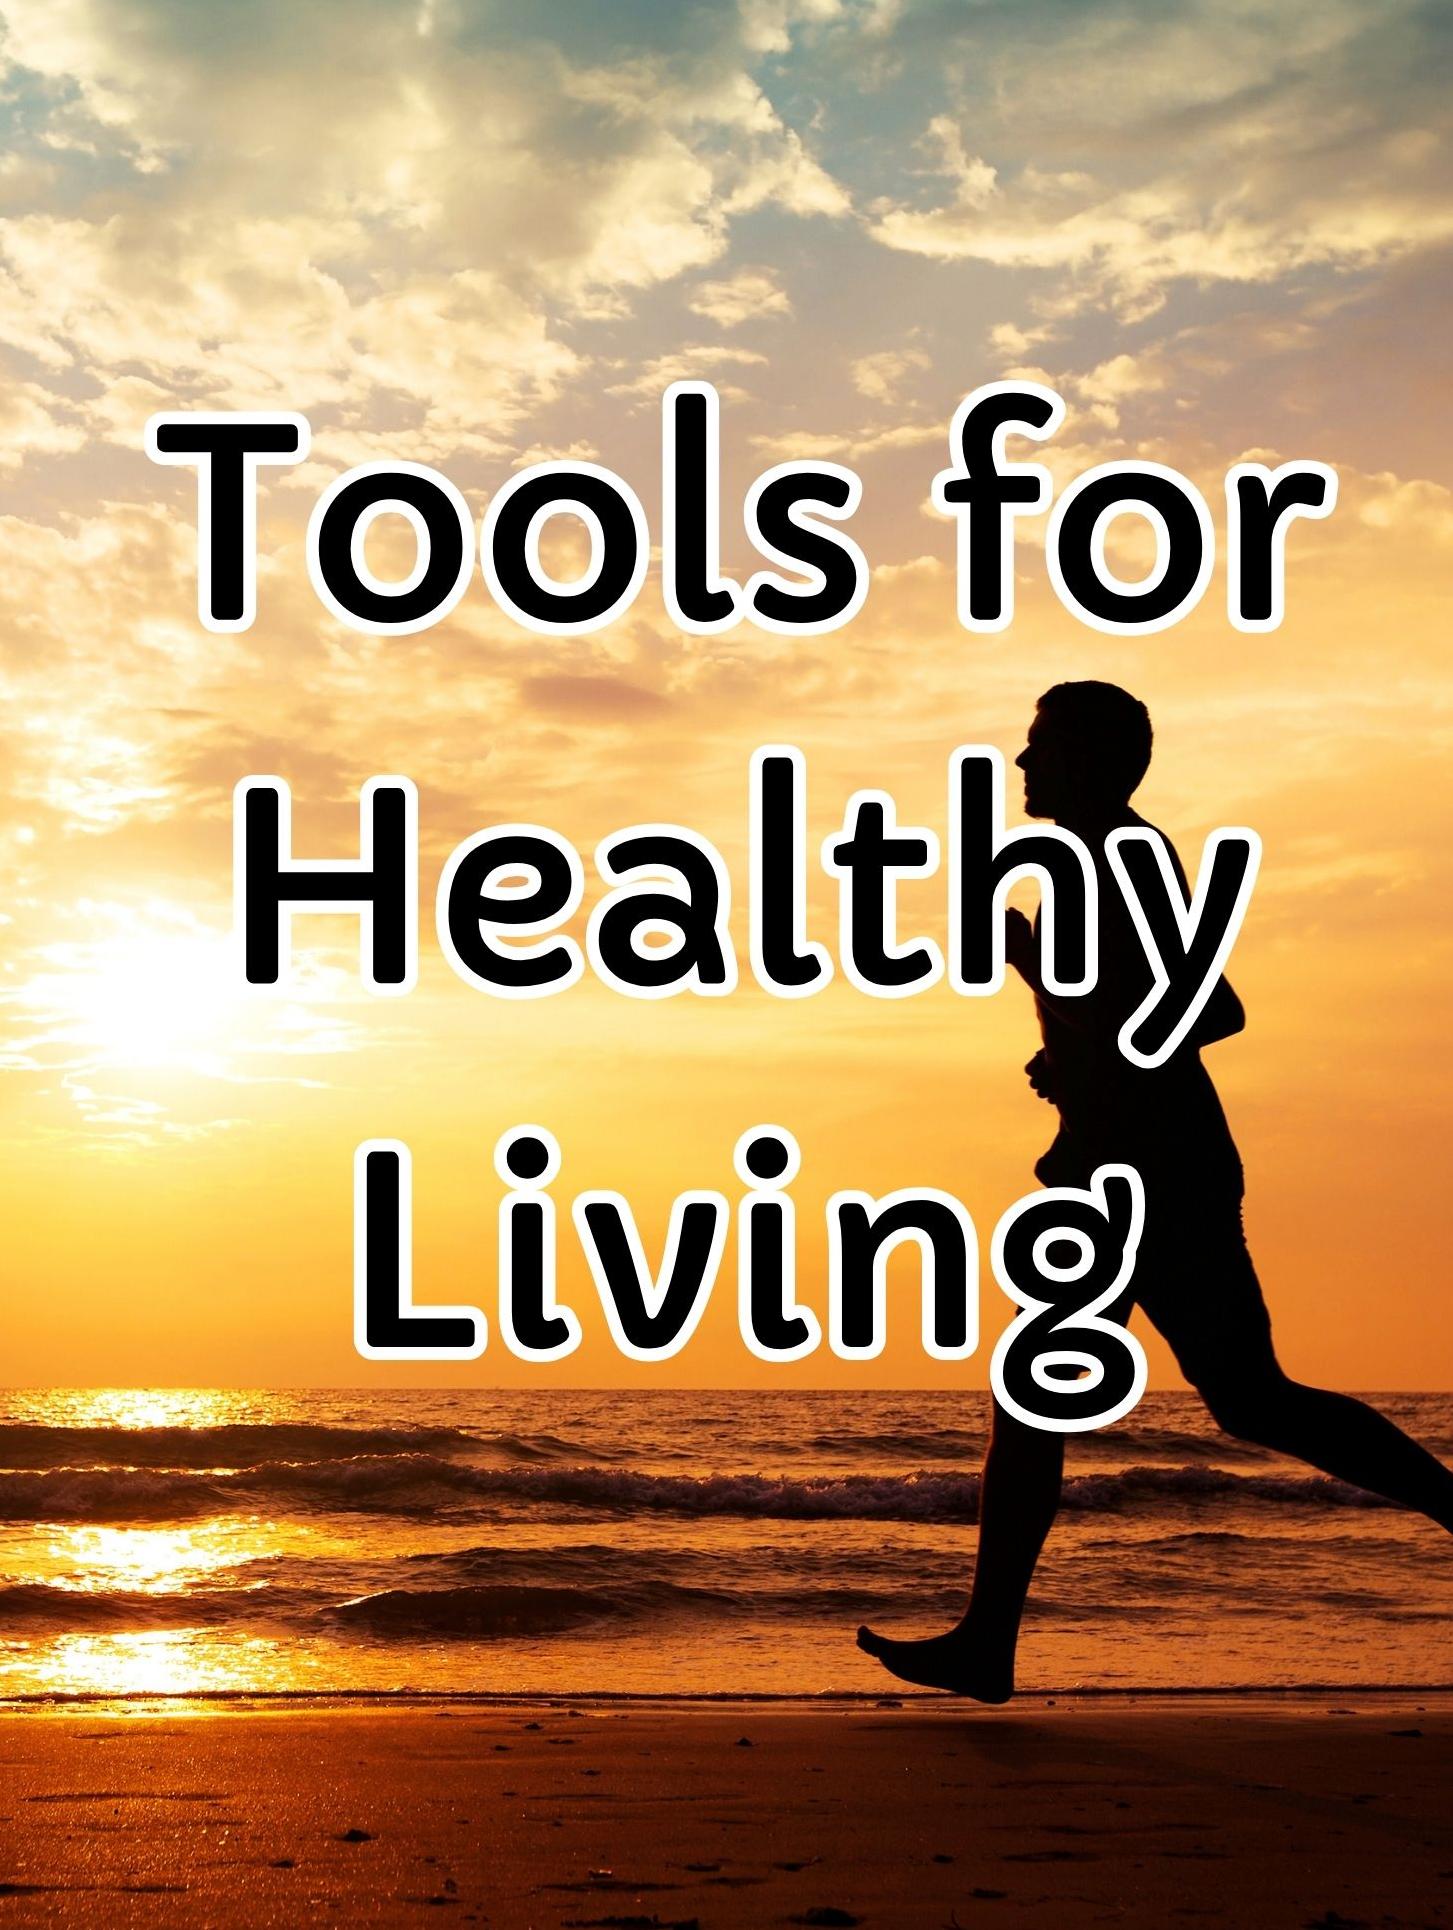 Man jogging at sunset with text: "Tools for Healthy Living"